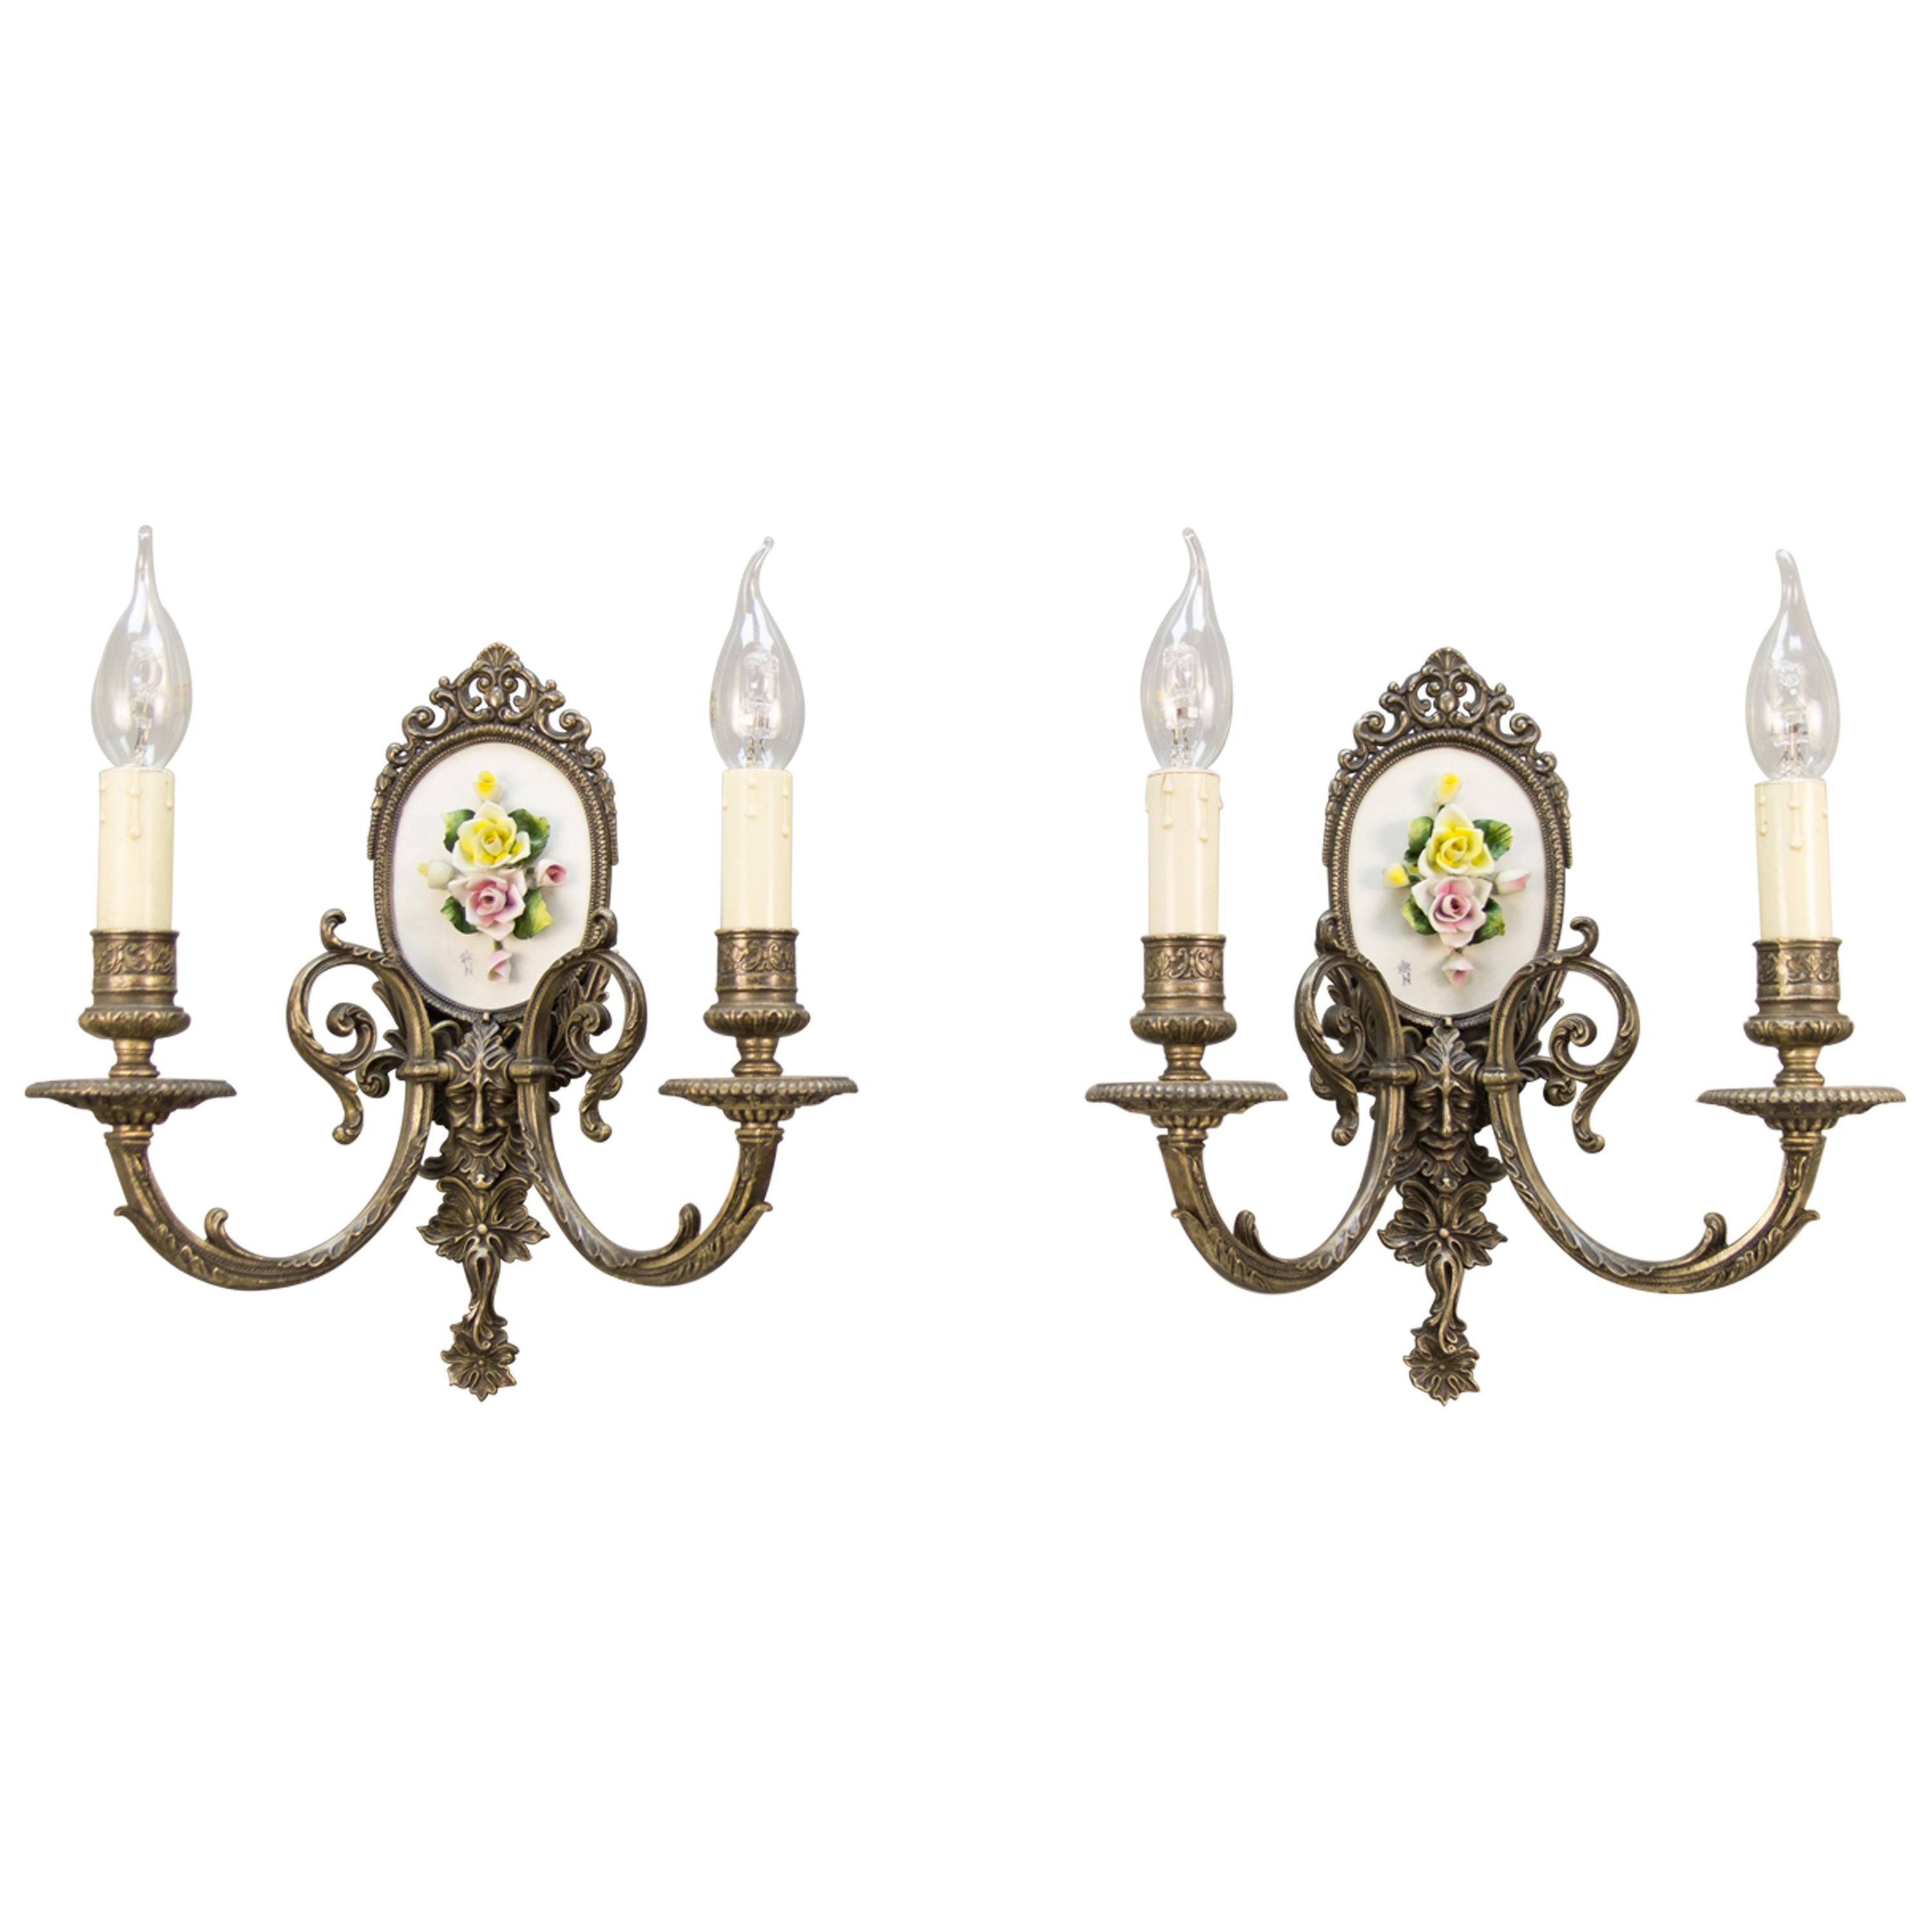 Pair of Mid-20th Century Italian Capodimonte Porcelain and Brass Sconces